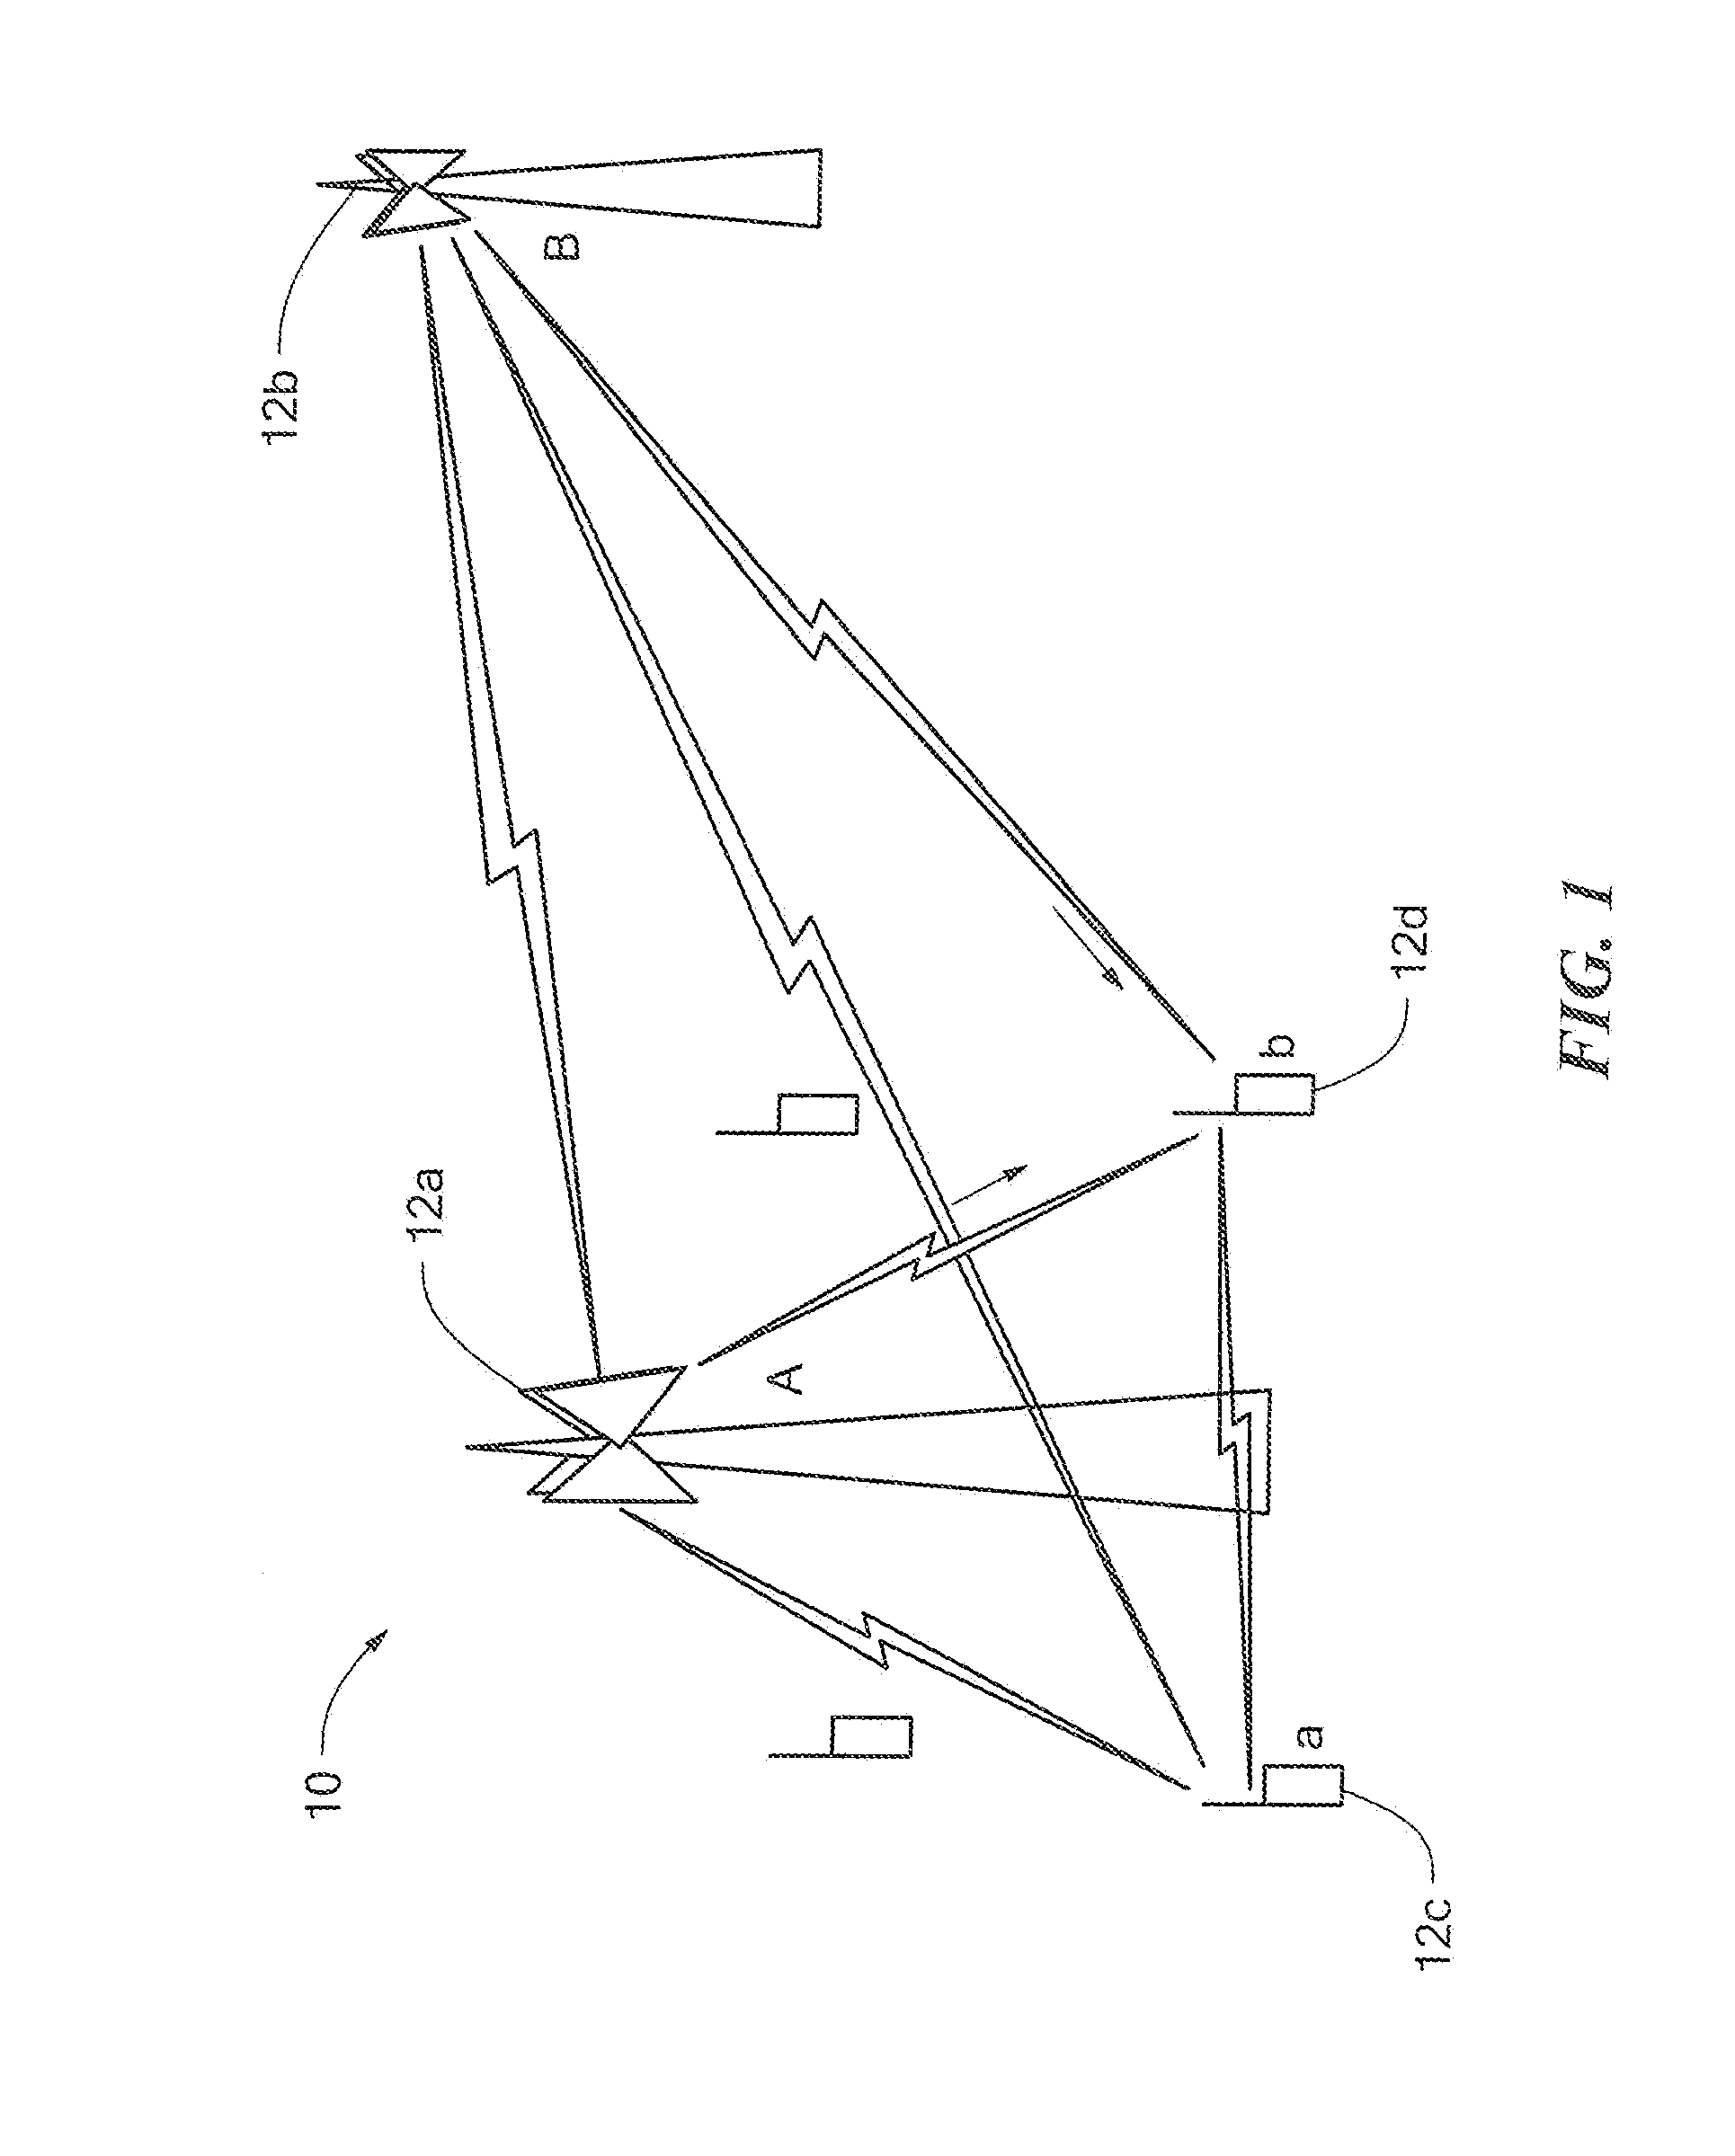 Method And Apparatus For Making Optimal Use Of An Asymmetric Interference Channel In Wireless Communication Systems